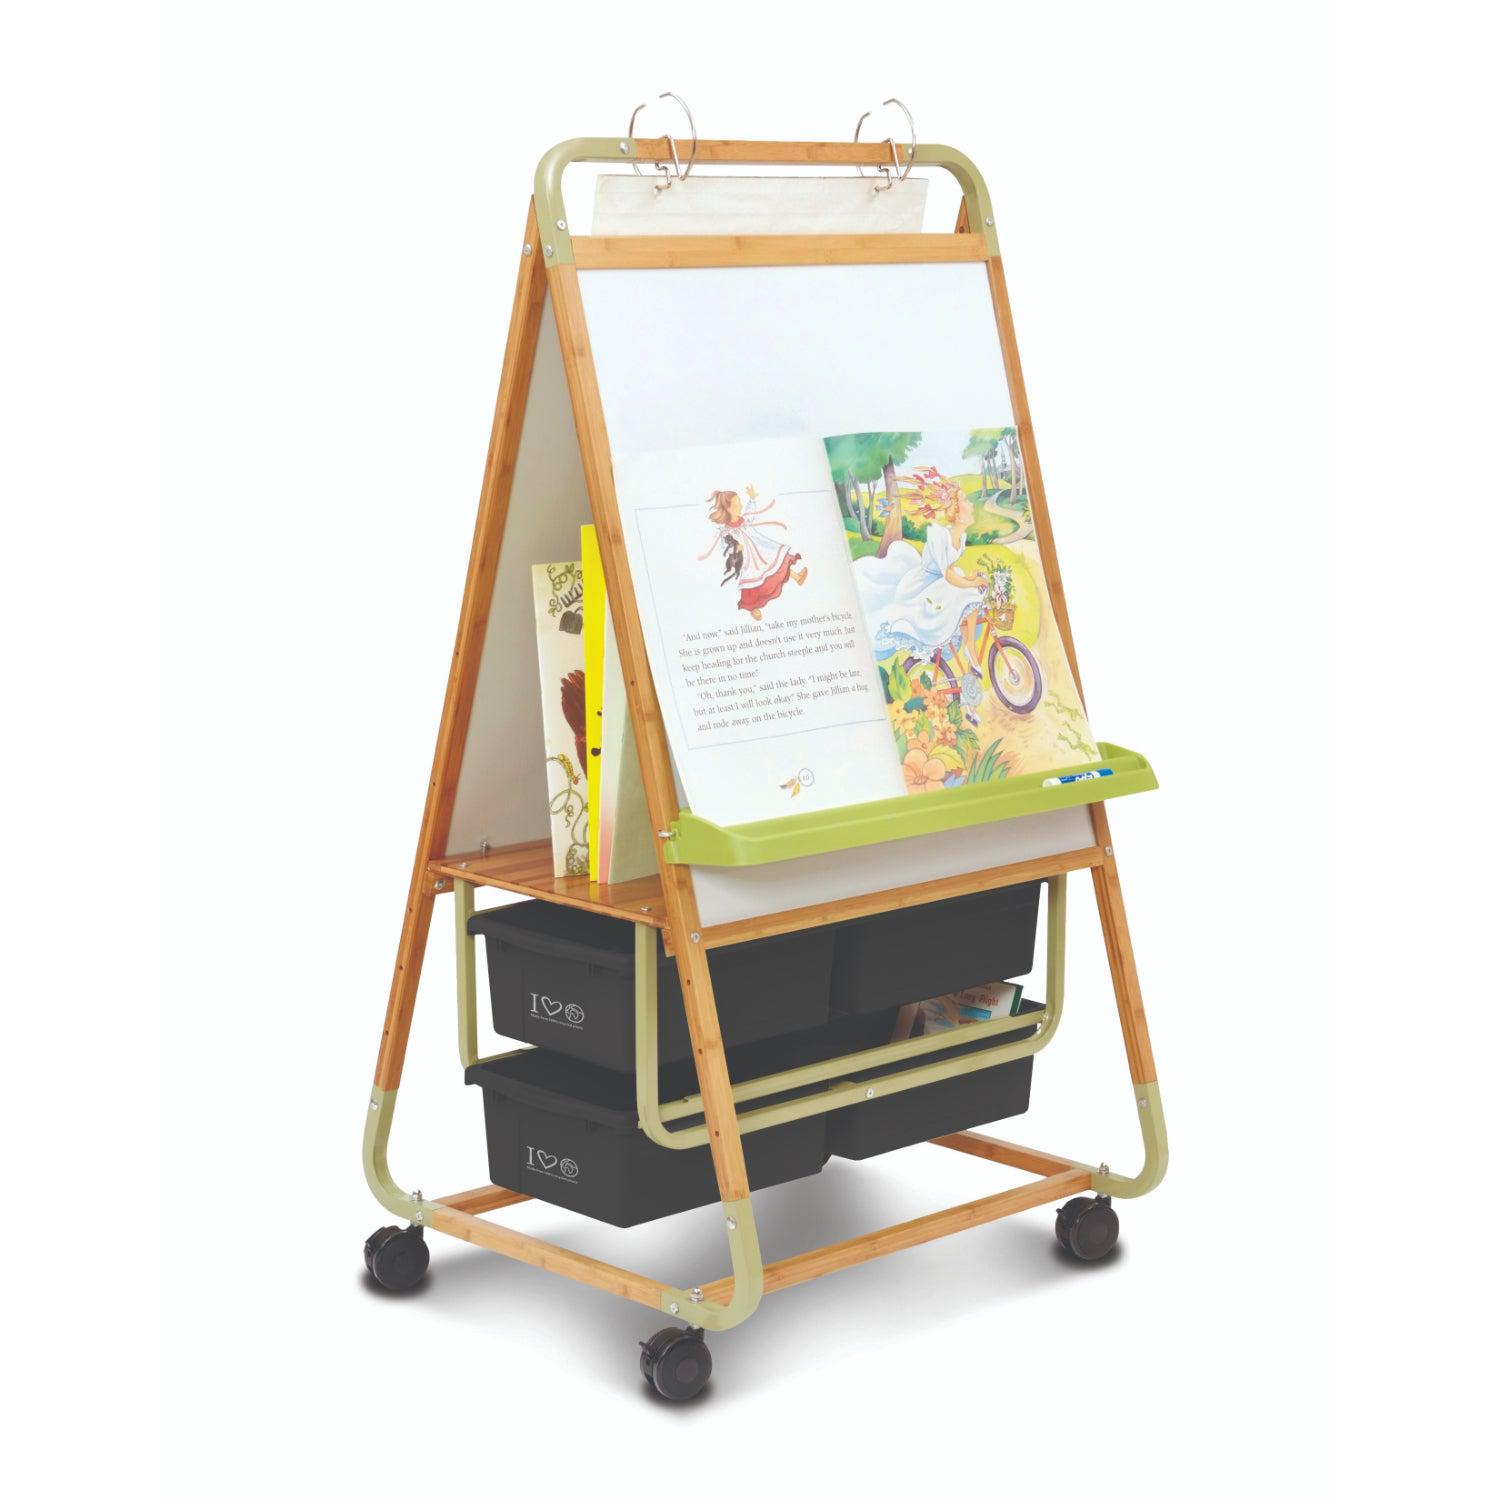 Double Sided Bamboo Teaching Easel with 100% Recycled Plastic Tubs